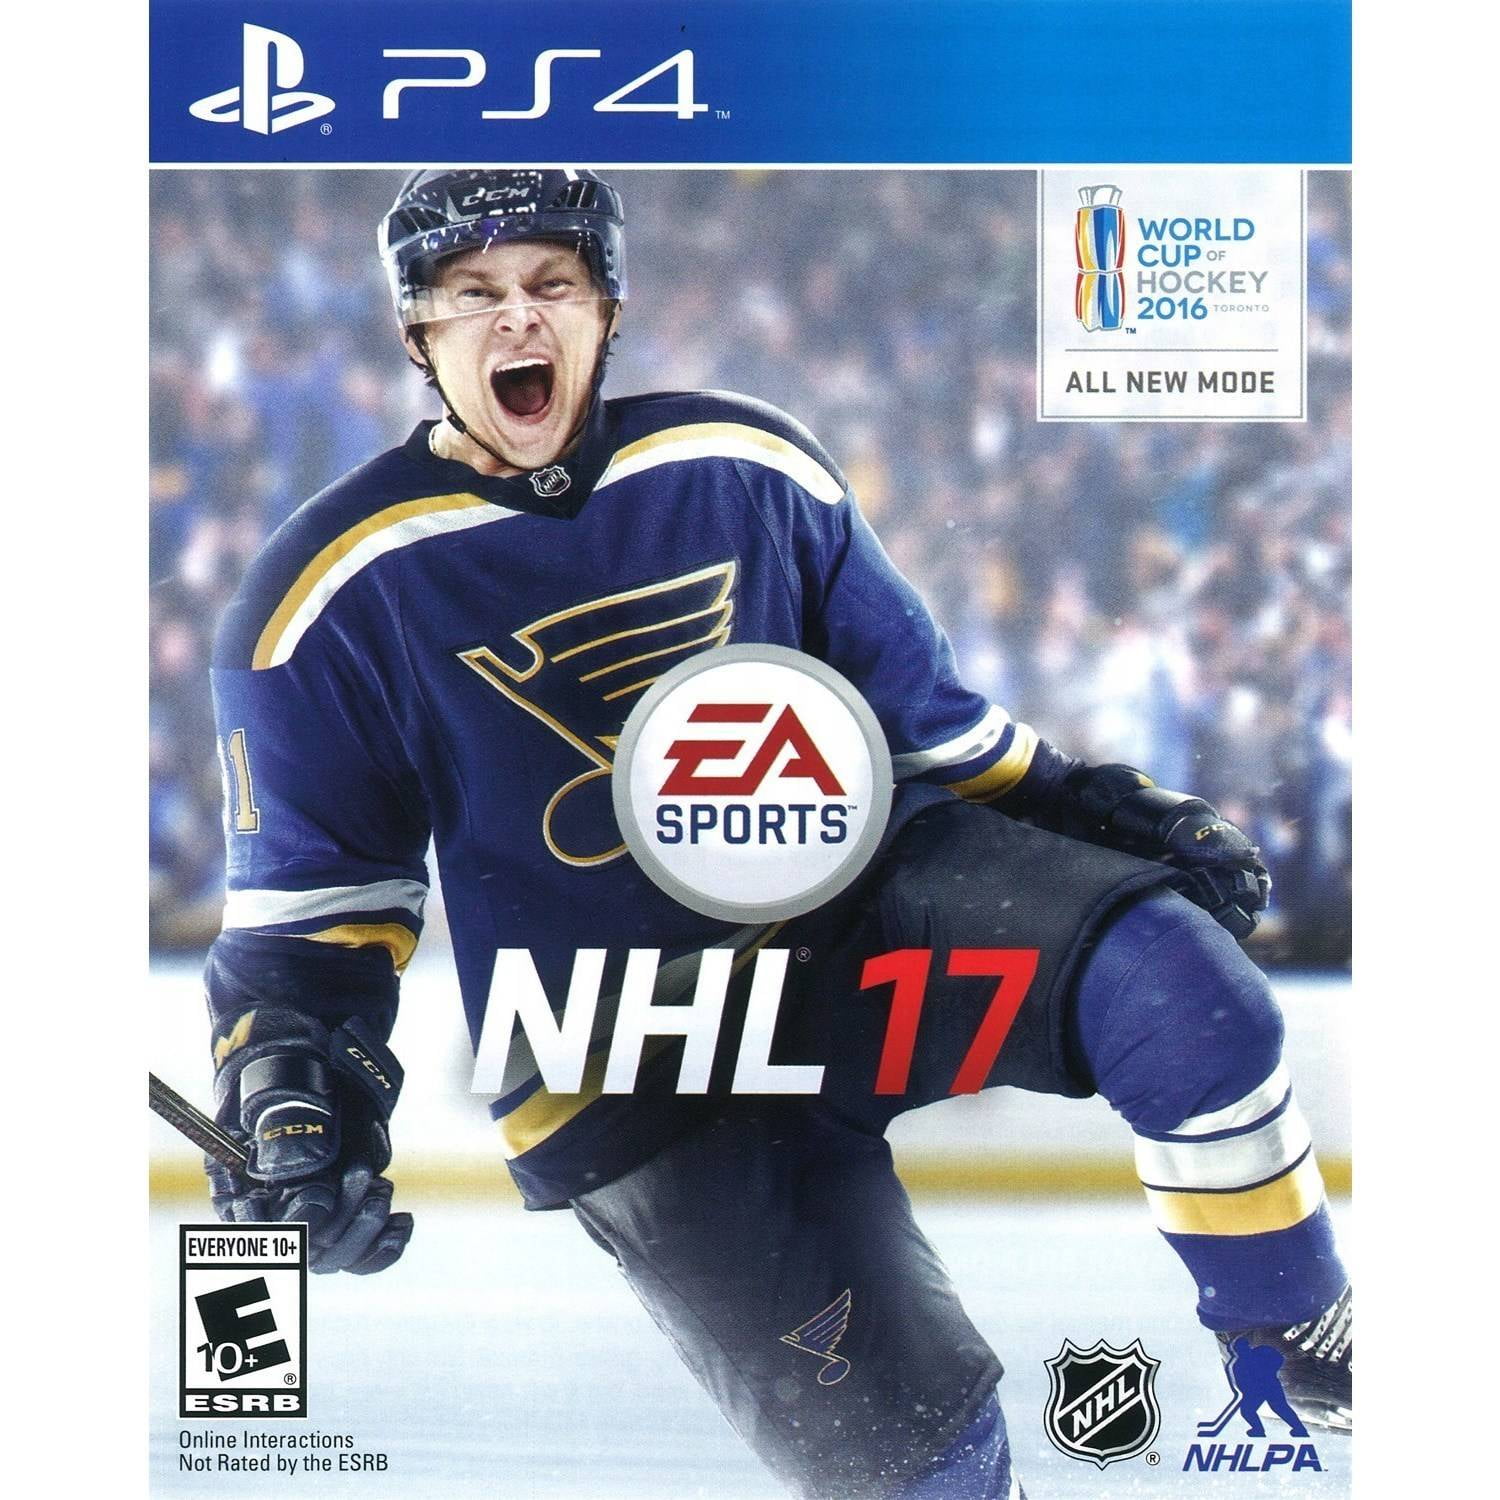 Ice, ice, baby: NHL 17 review